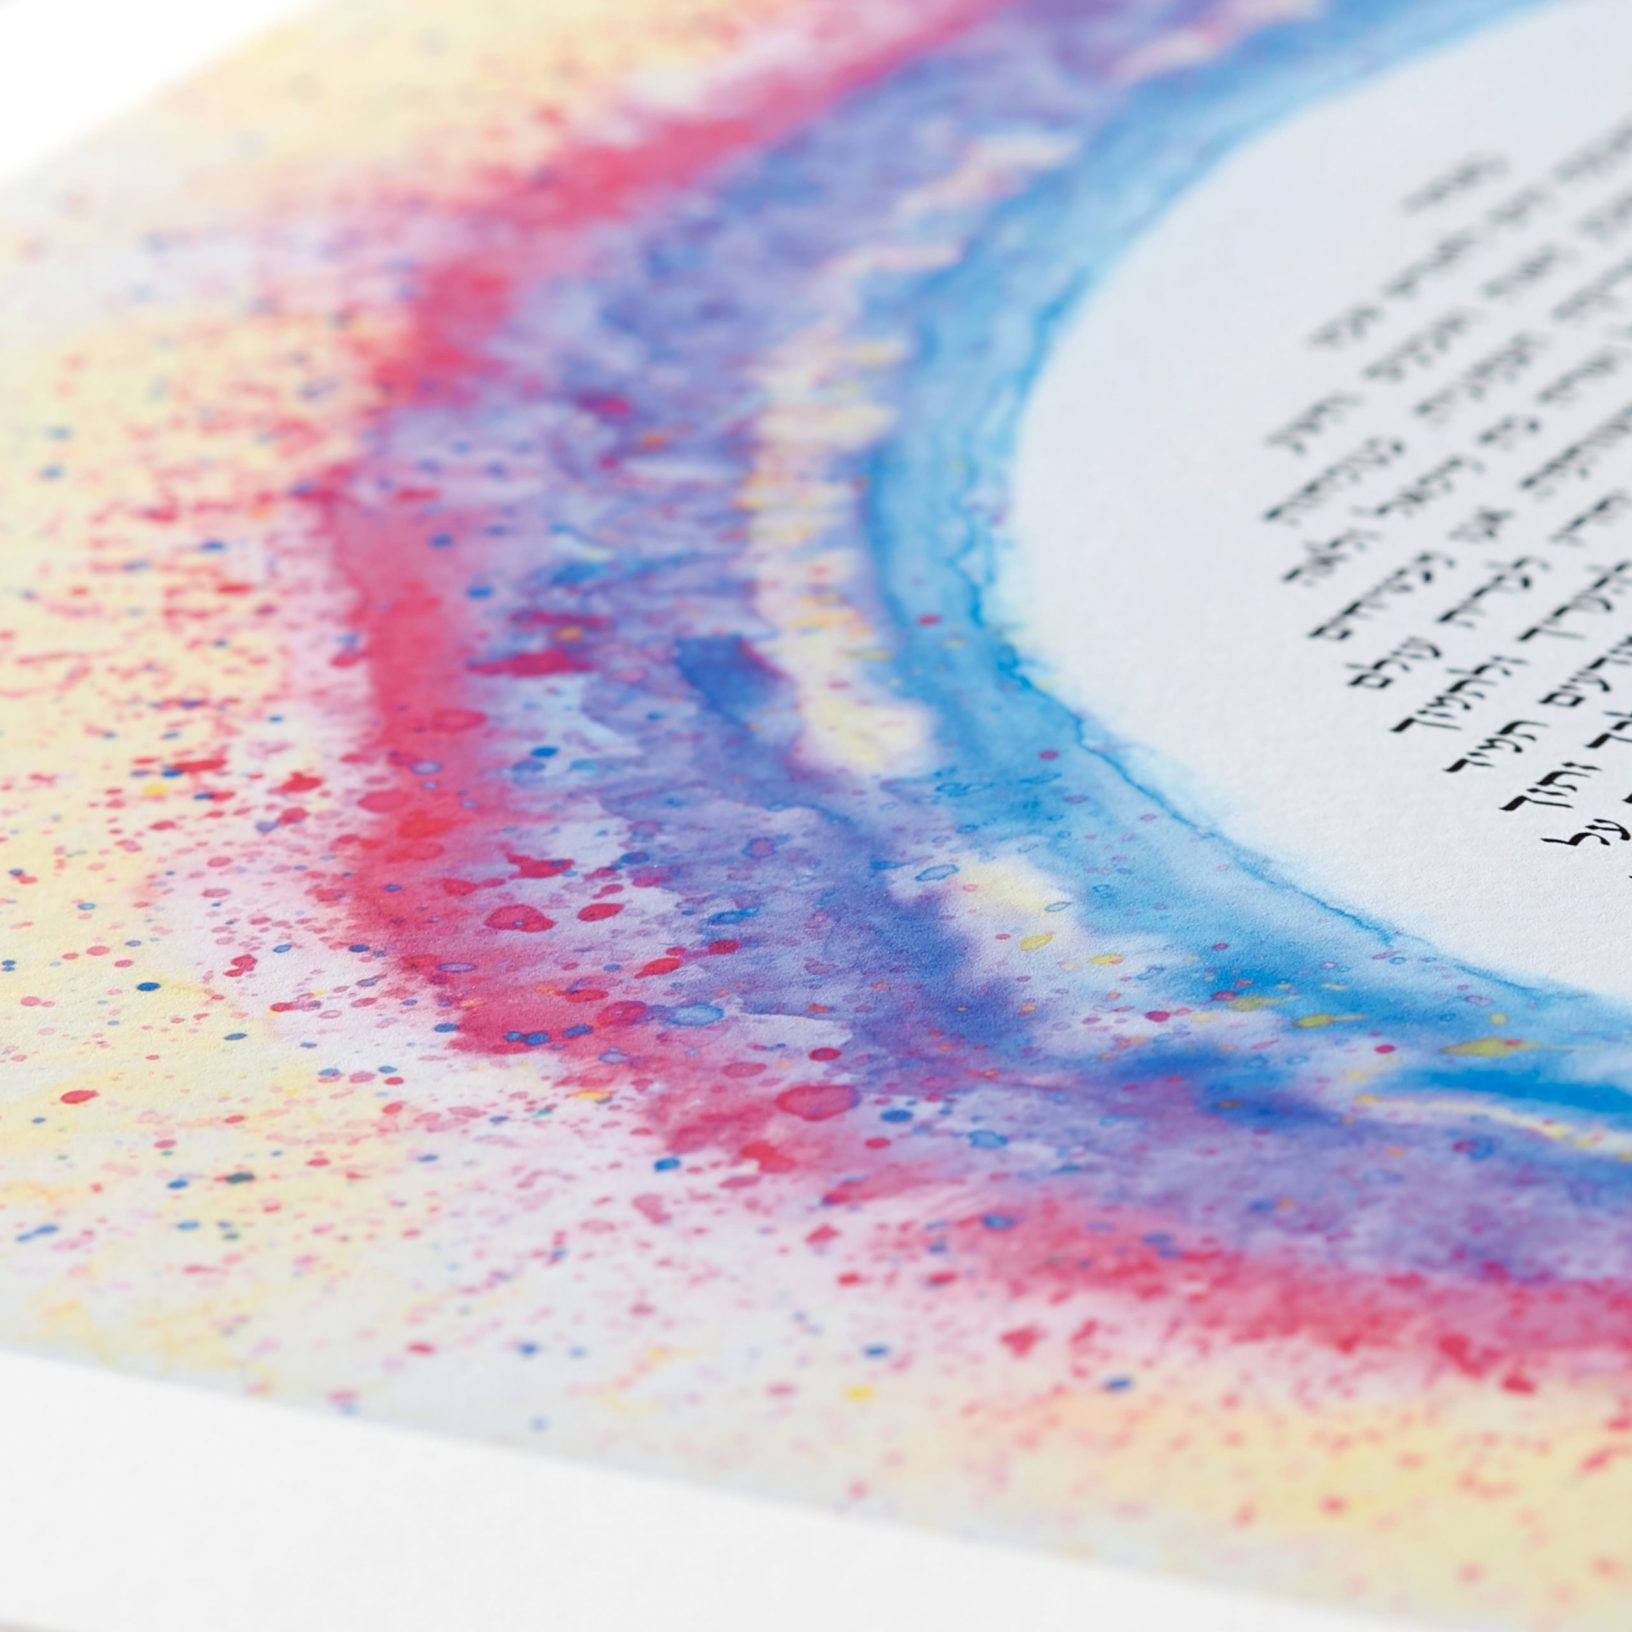 Starburst Ketubah Marriage Contracts by Susanne McGinnis